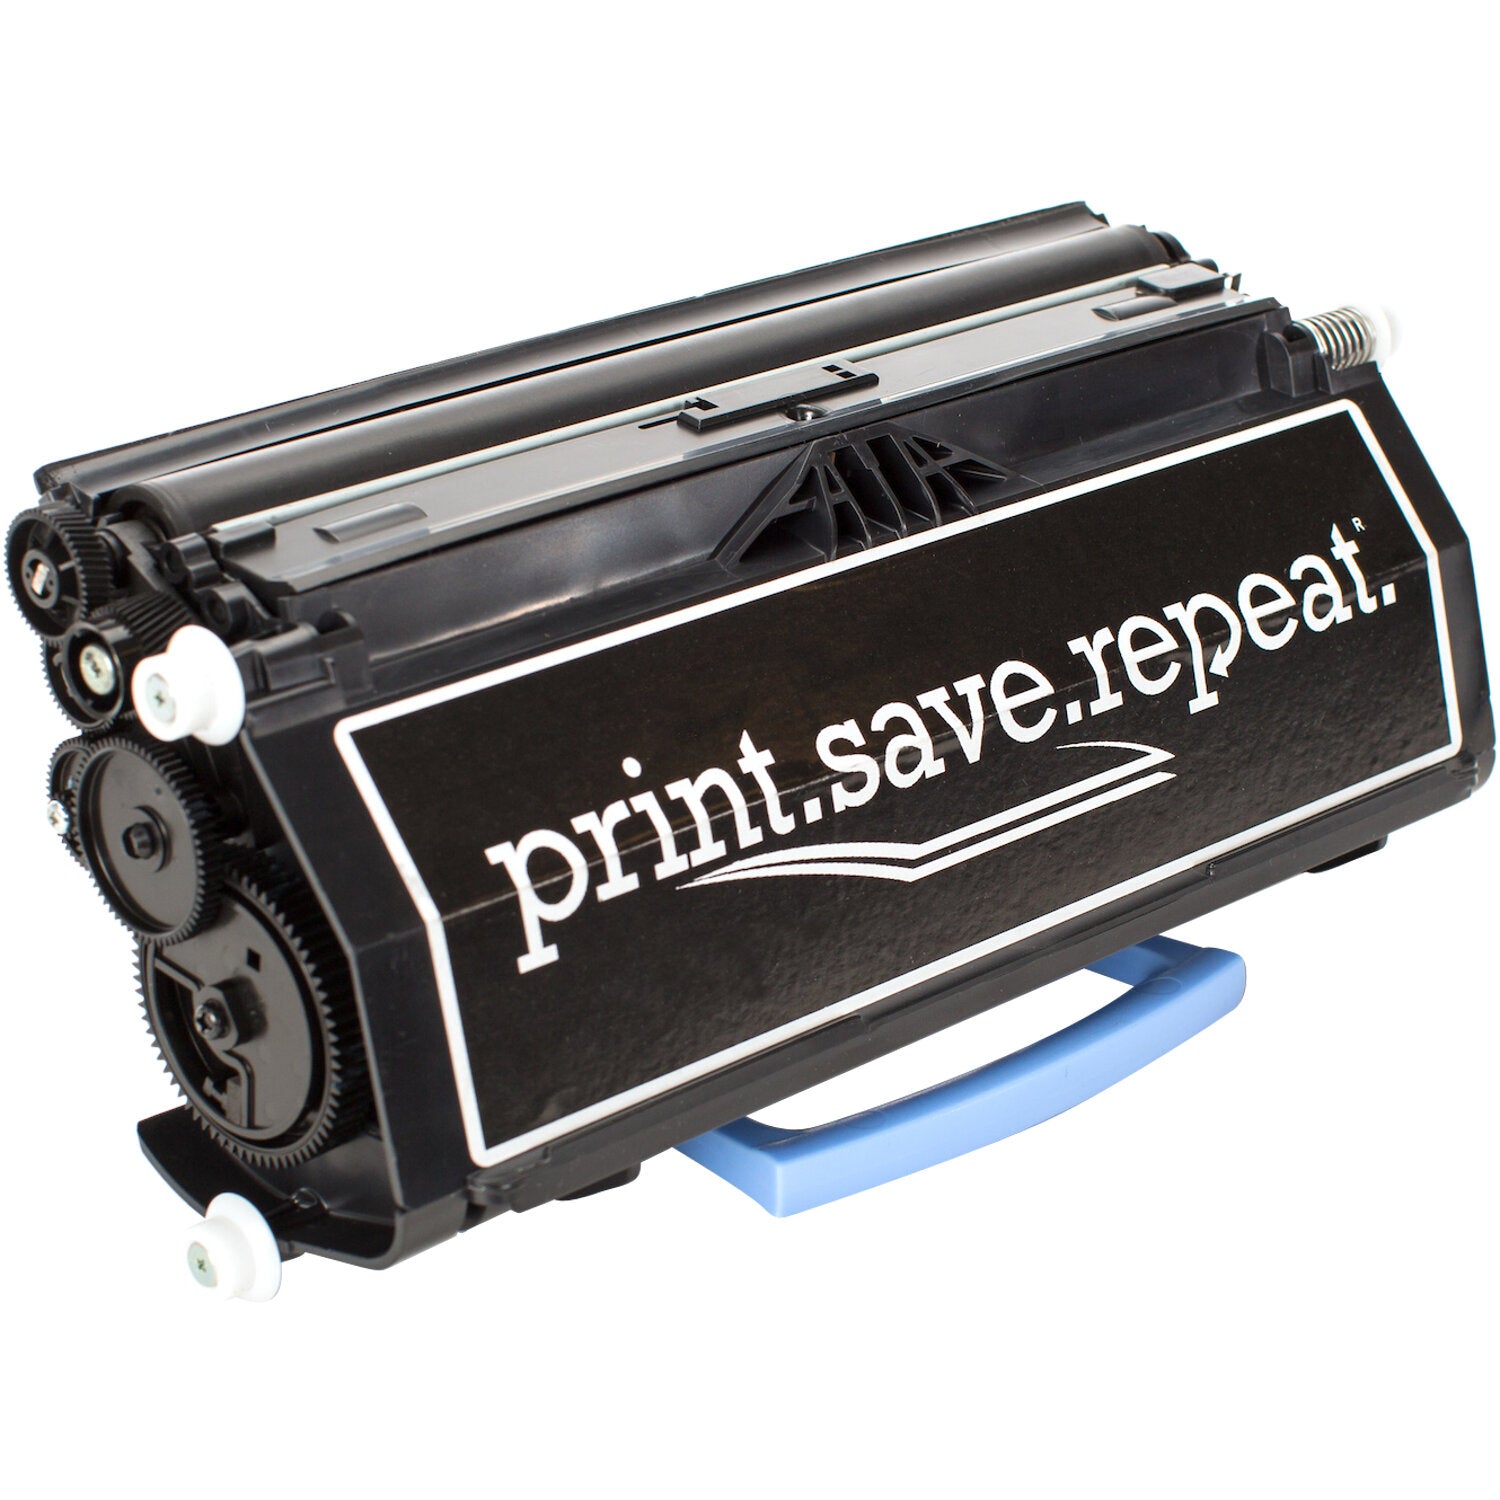 Print.Save.Repeat. Lexmark X264H21G High Yield Remanufactured Toner Cartridge for X264, X363, X364 [9,000 Pages]